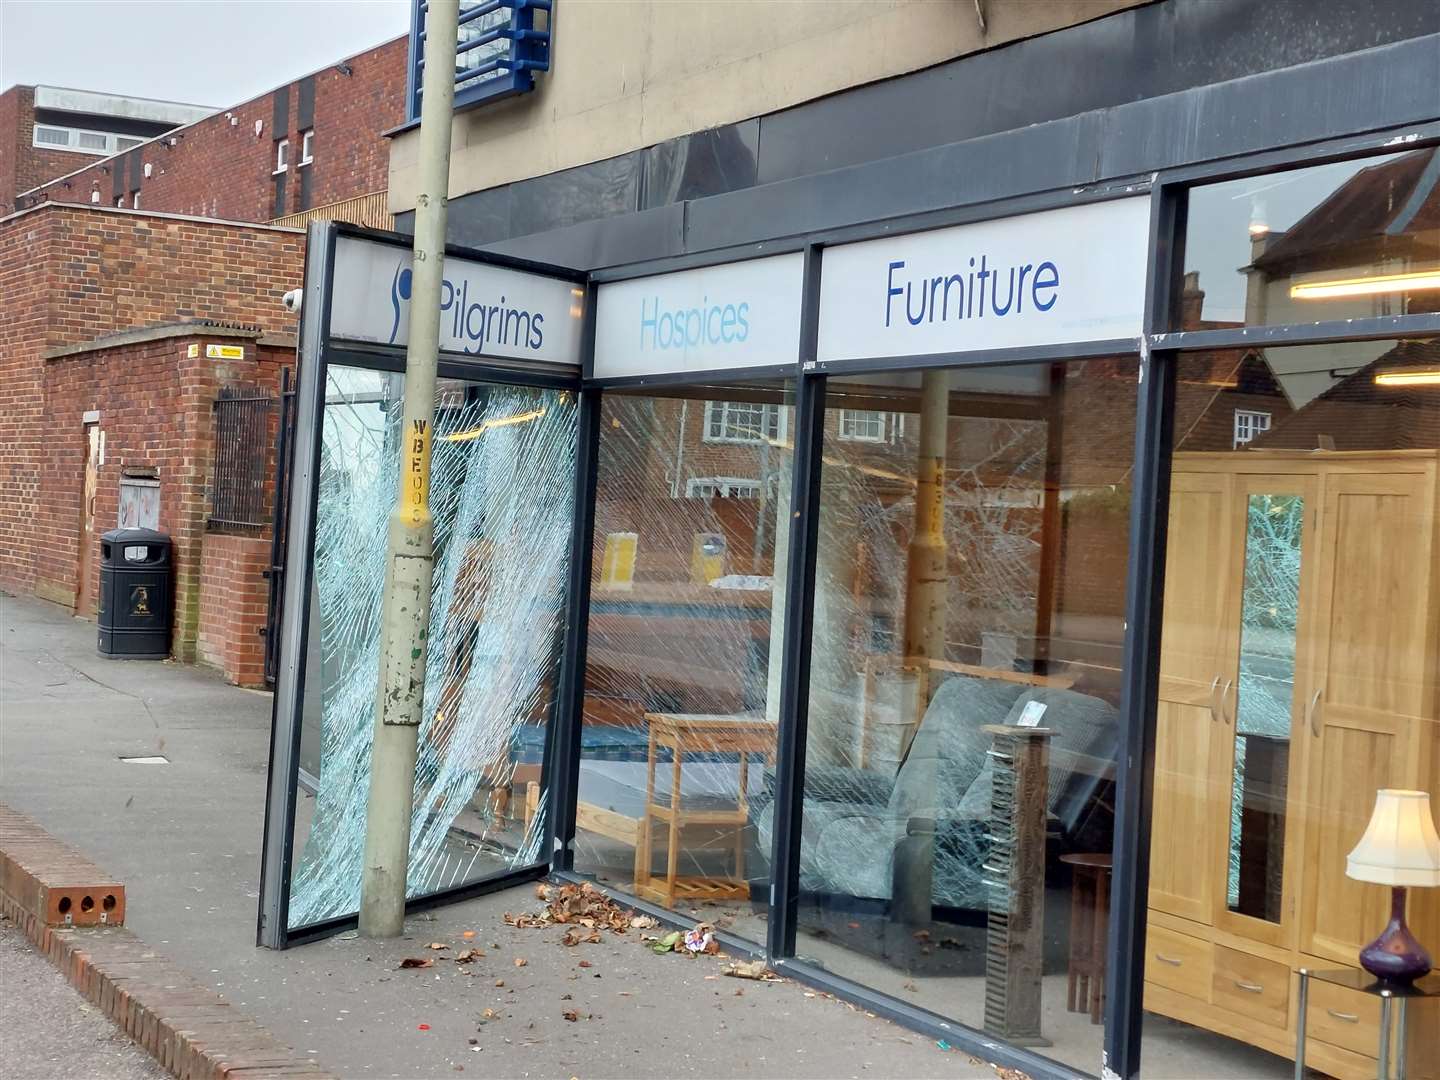 The front of the Pilgrims Hospice shop has been badly damaged